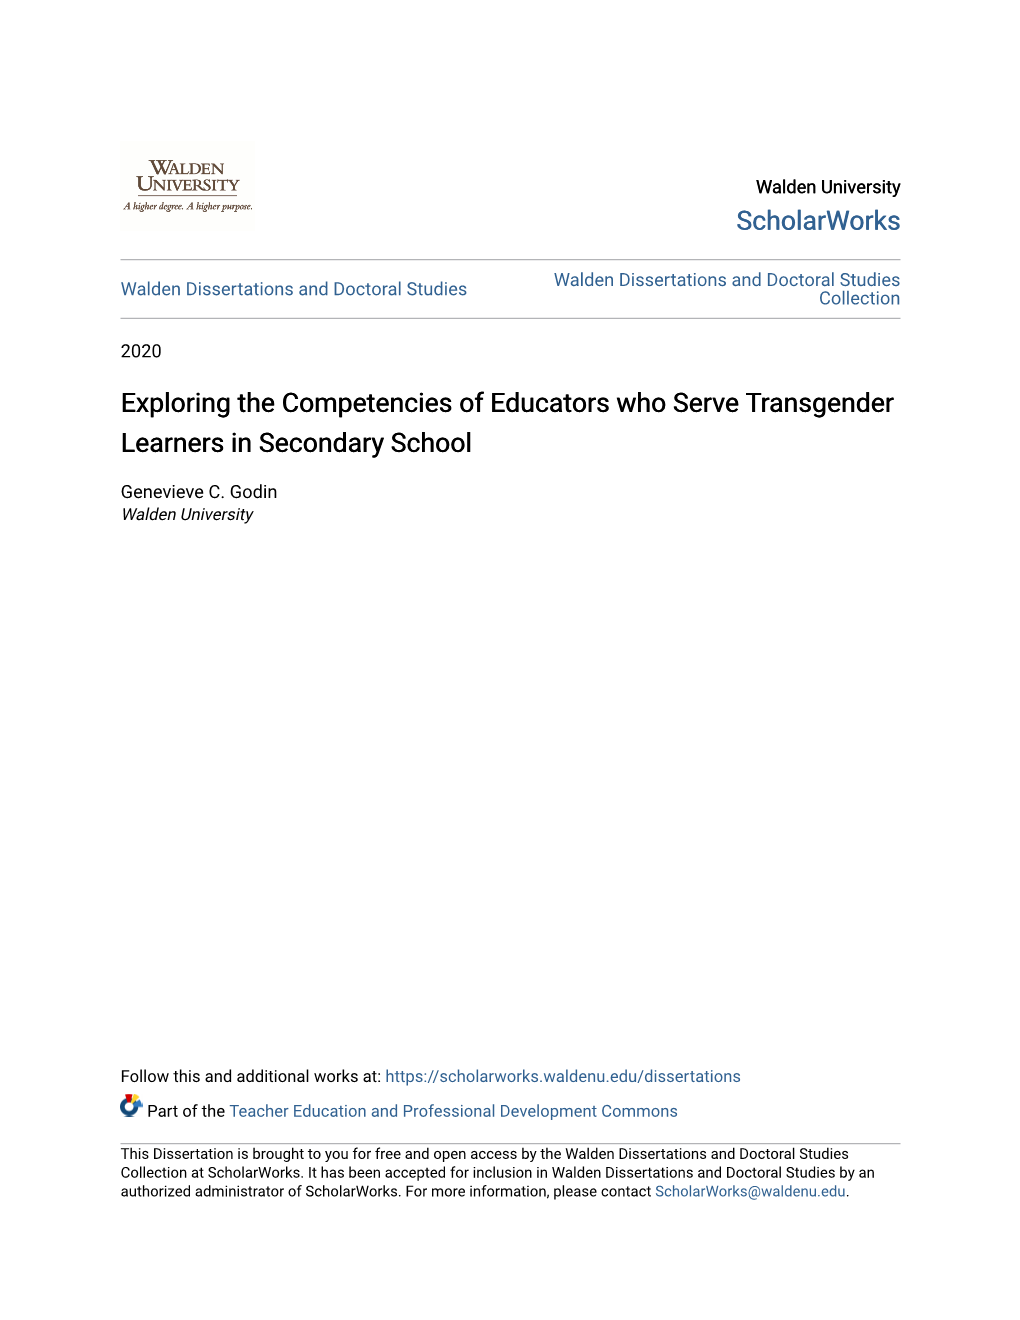 Exploring the Competencies of Educators Who Serve Transgender Learners in Secondary School